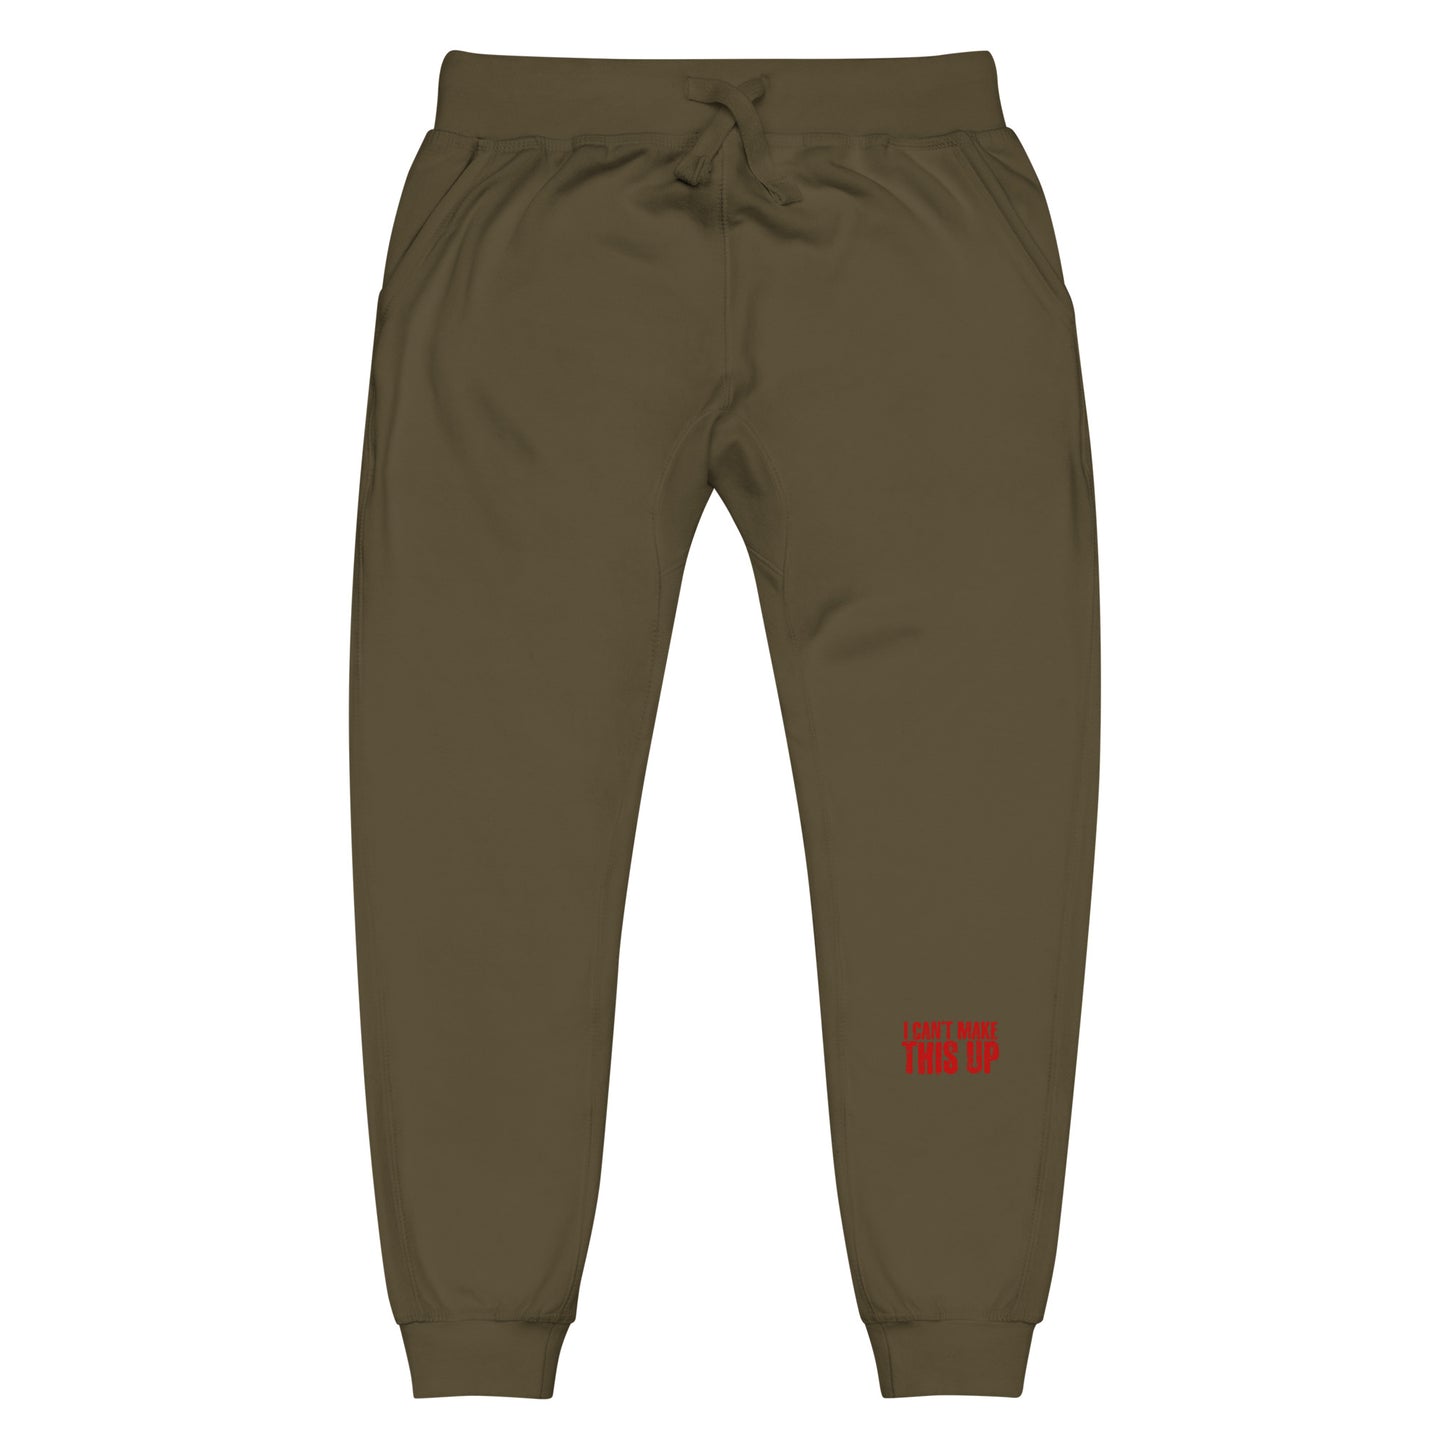 Camo with Red Unisex fleece sweatpants - I Cant Make This Up